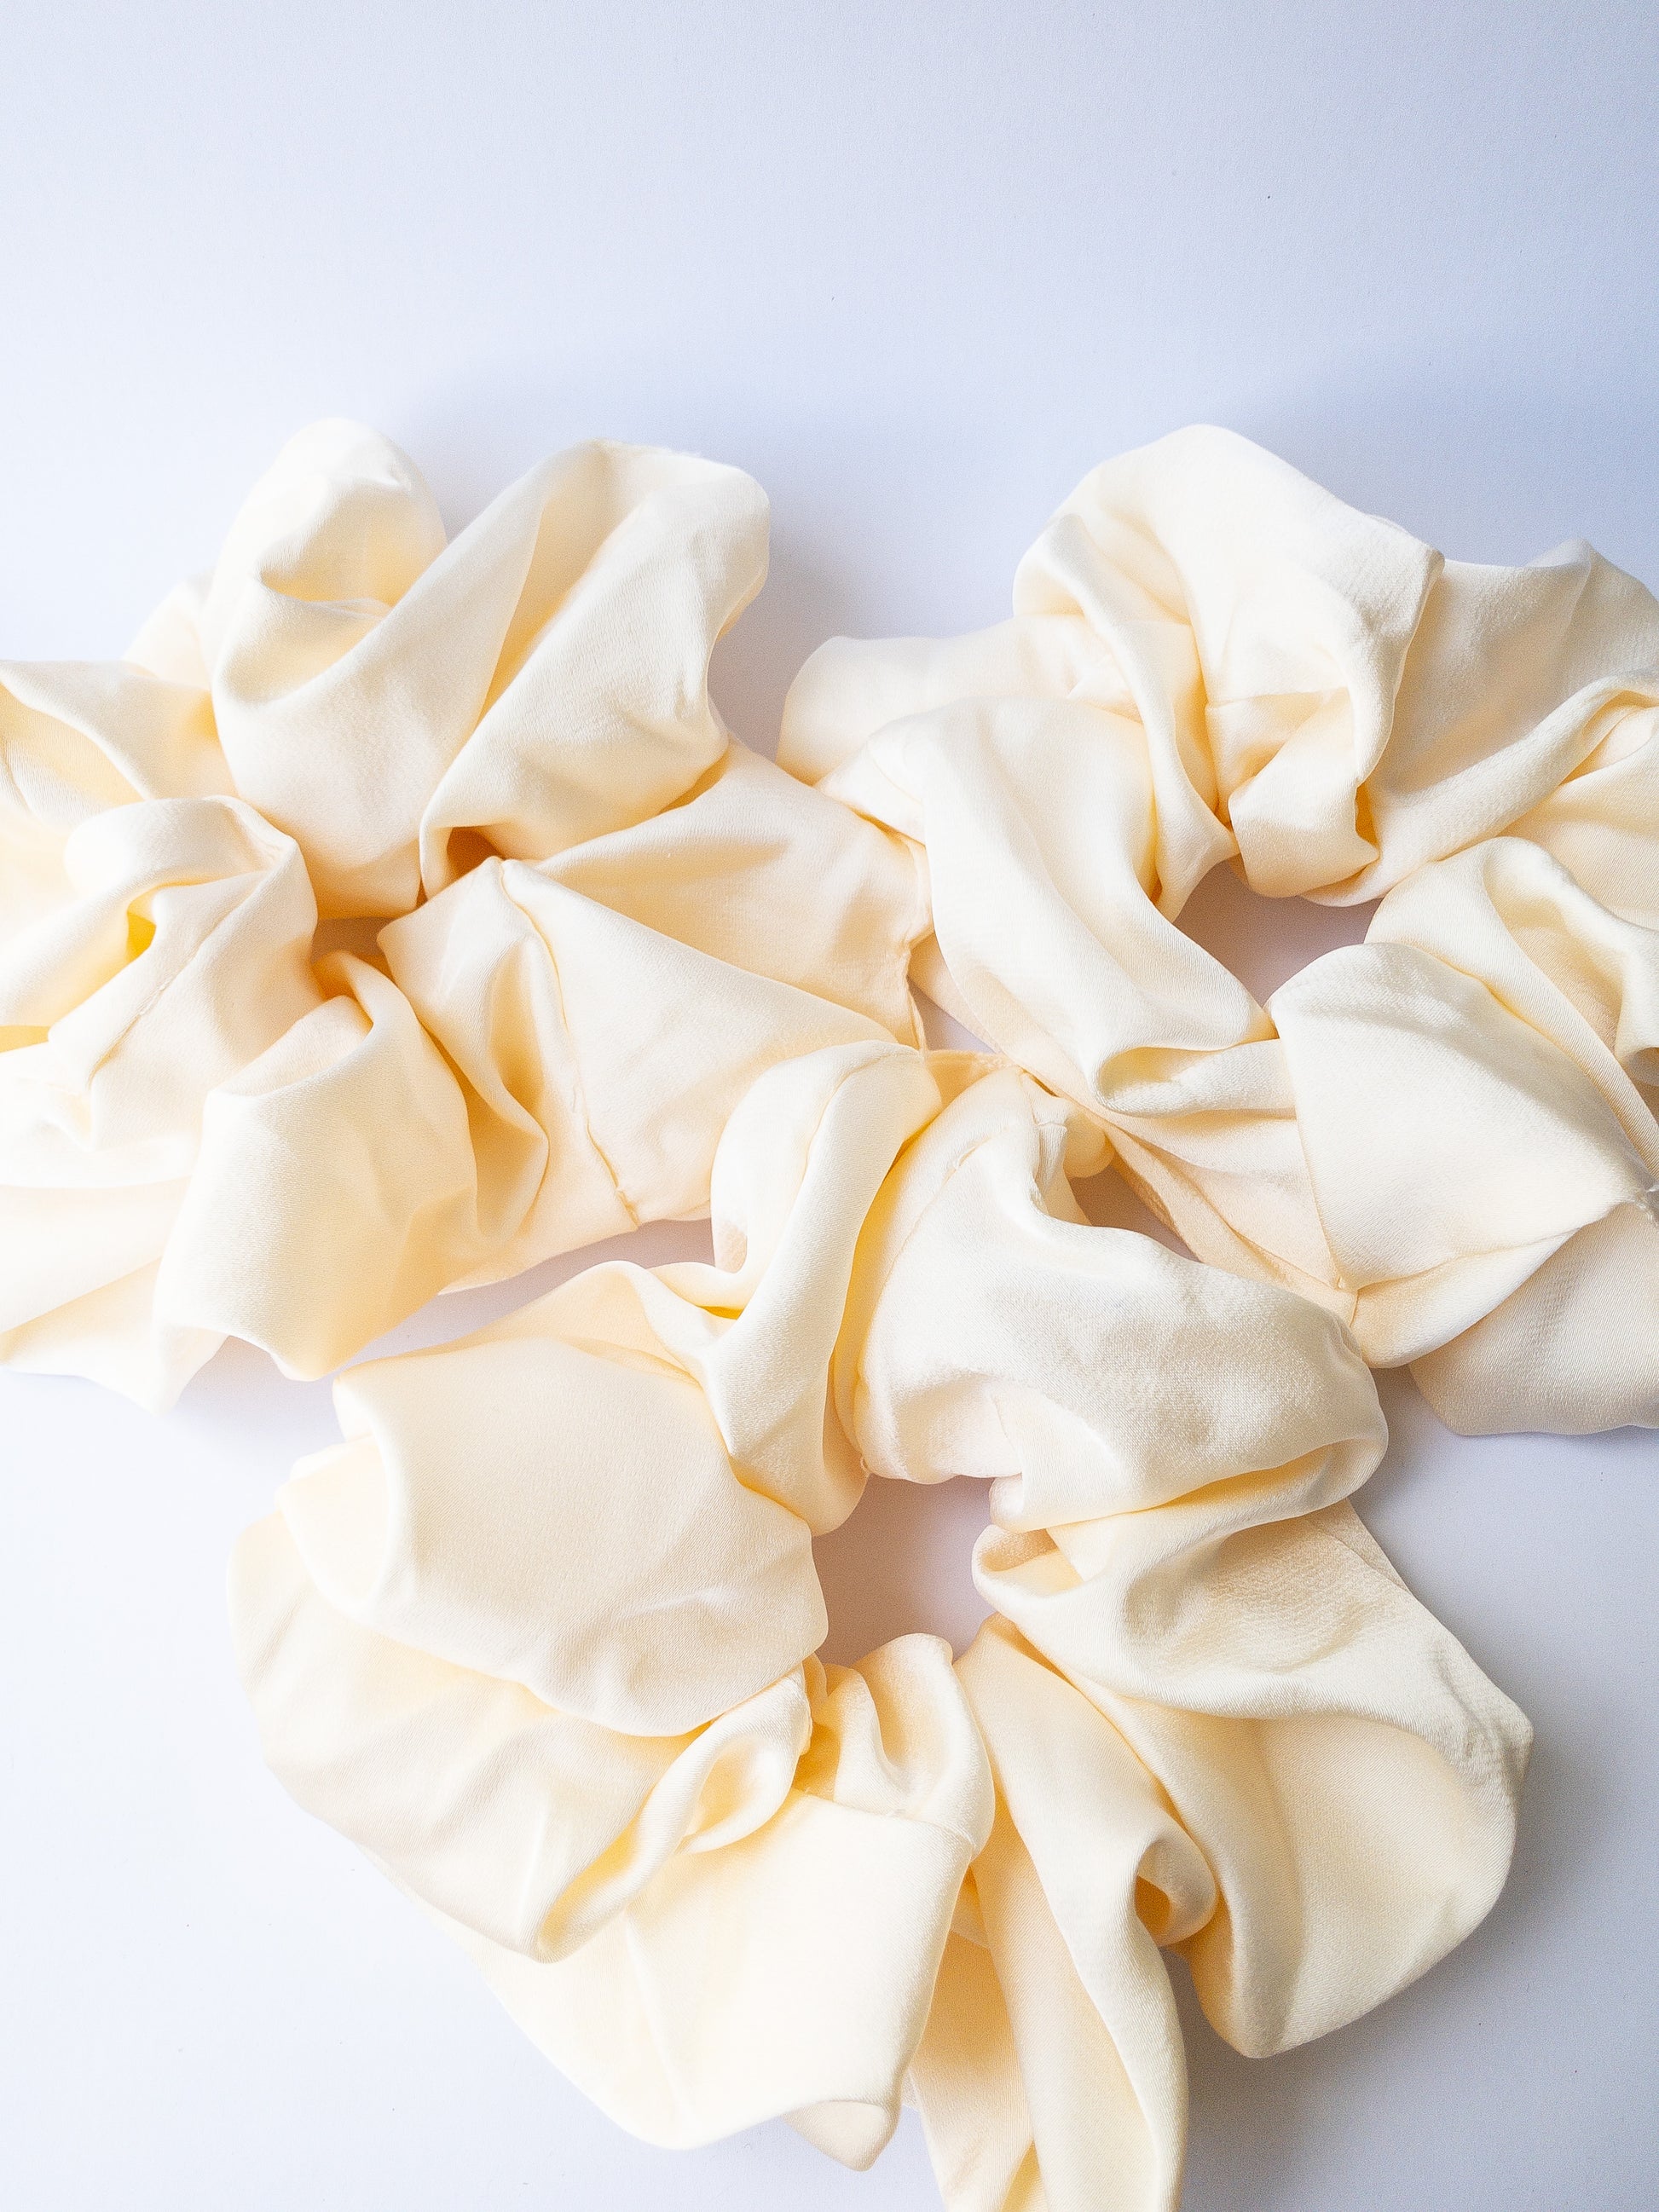 Rich and buttery soft jumbo oversized scrunchie in a beautiful ivory beige sheen. Perfect for holding curls and easily creating a romantic hairstyle. 